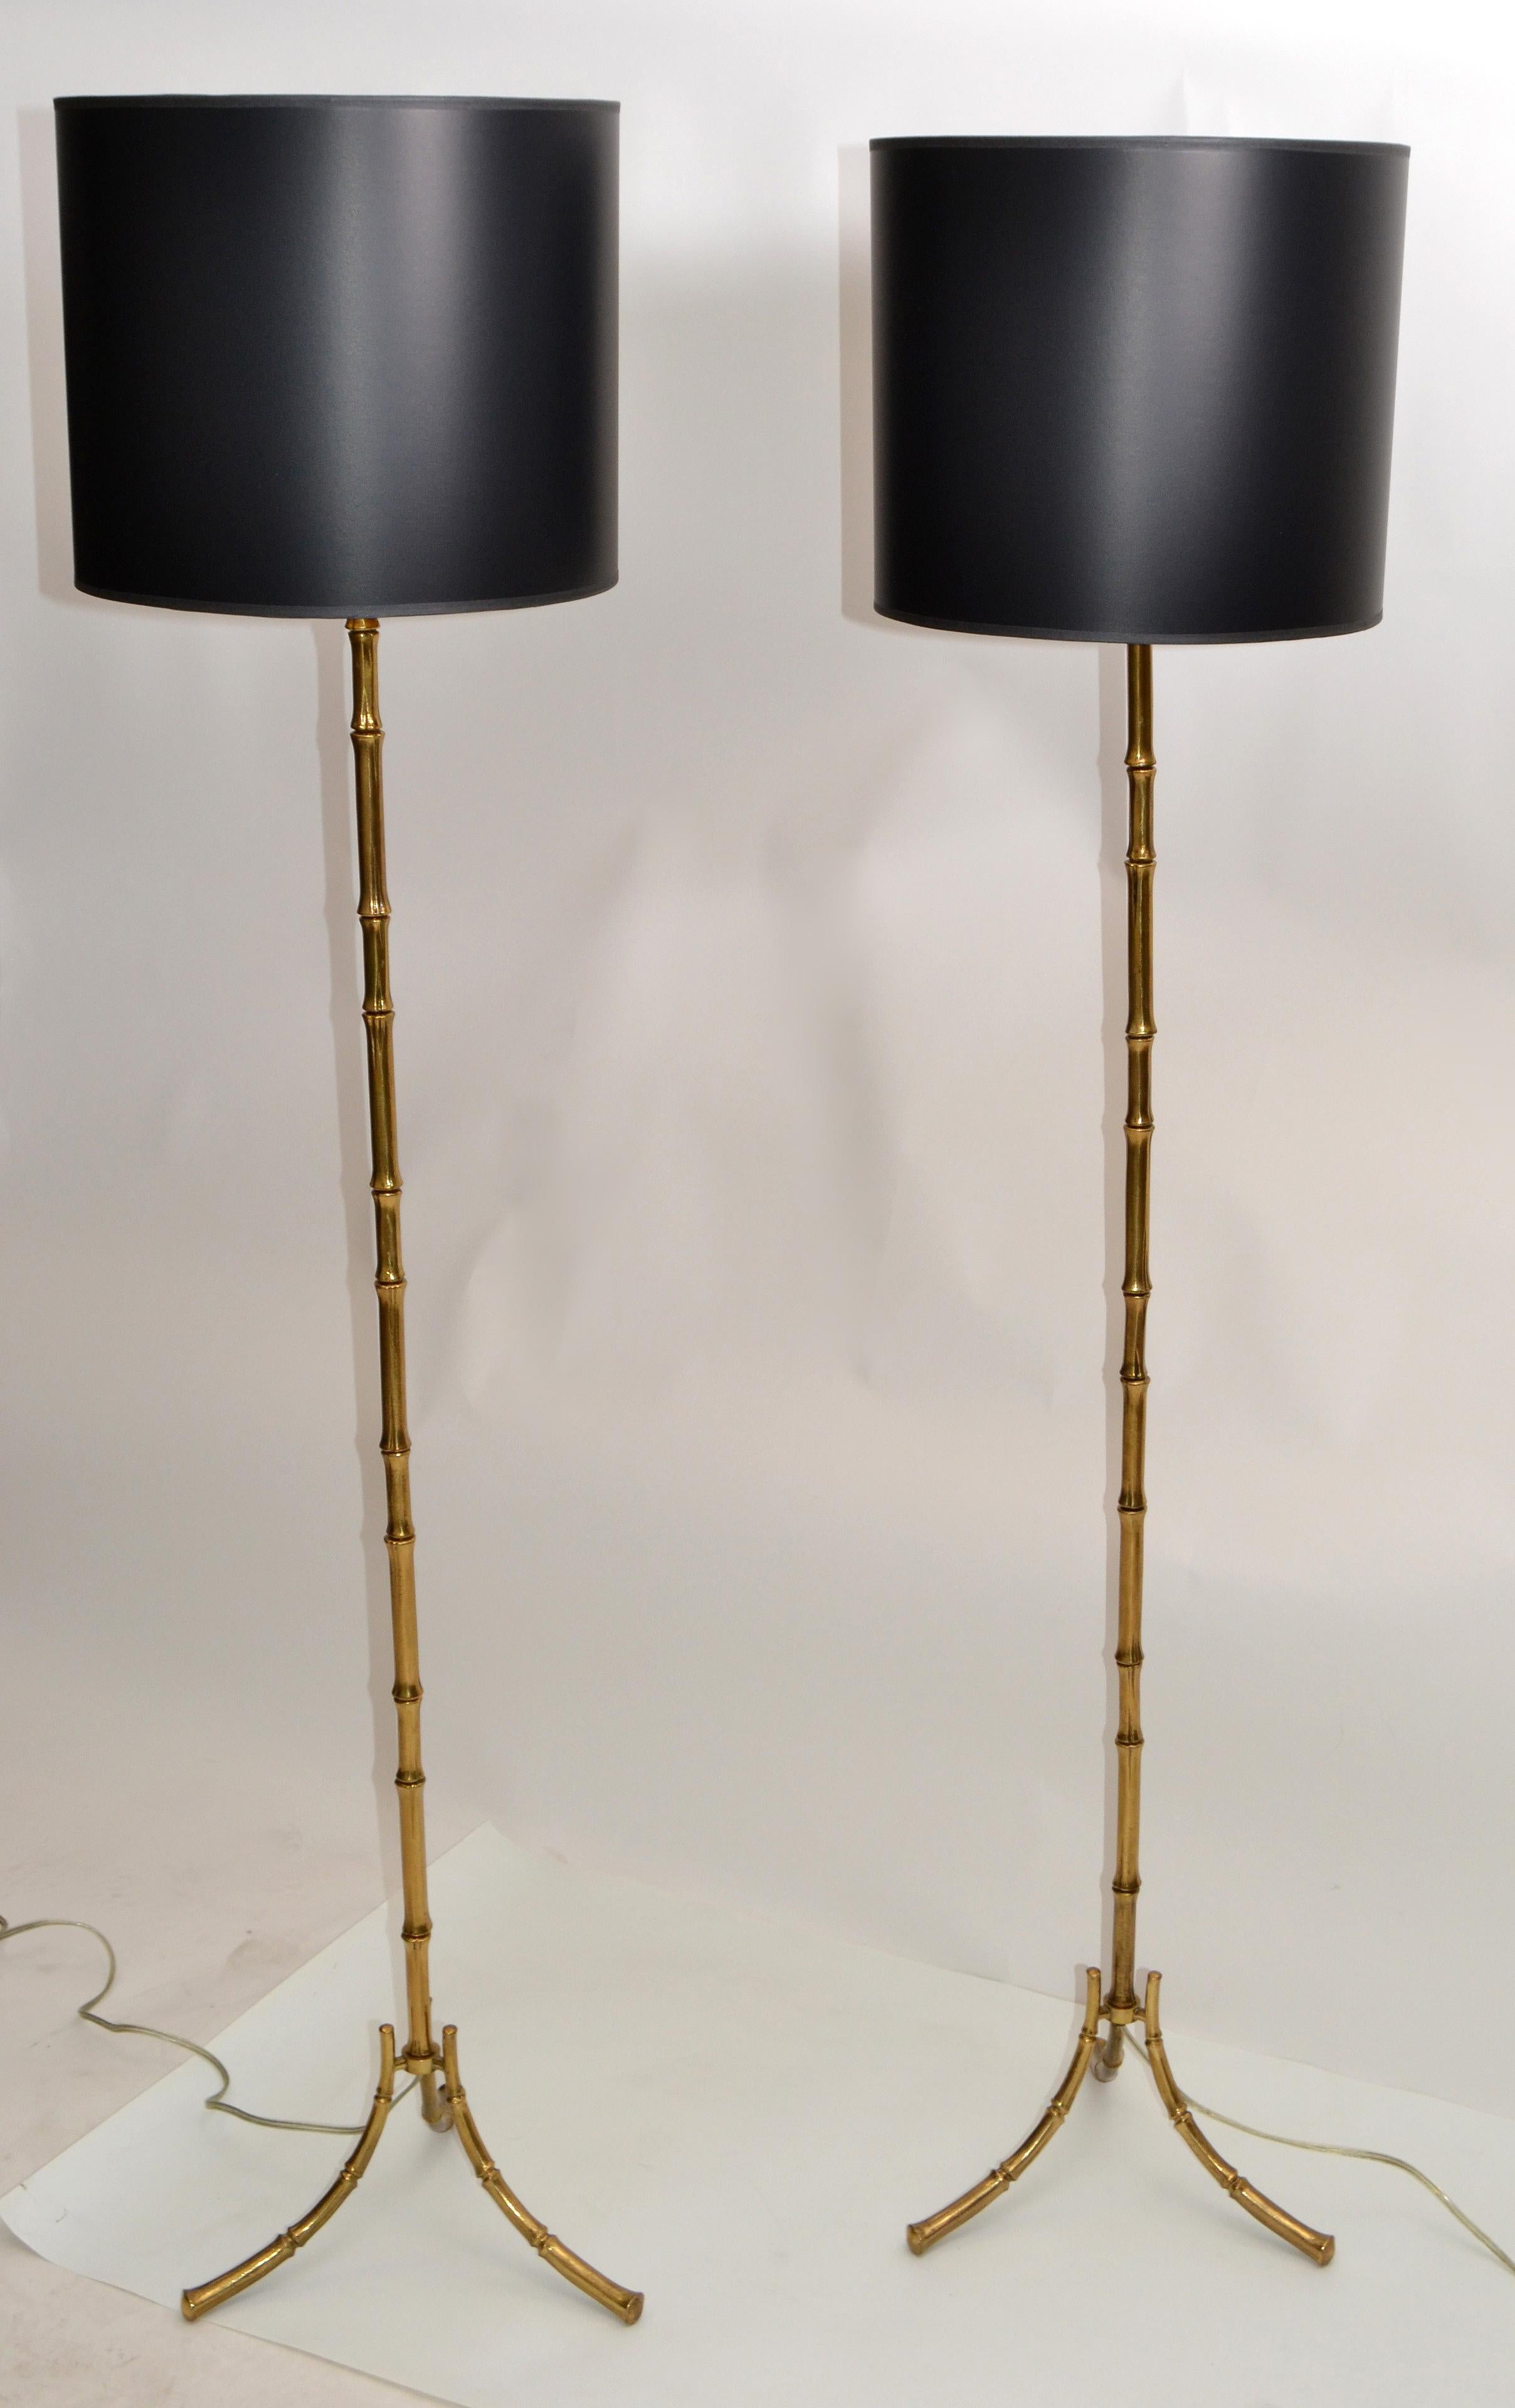 Maison Baguès French Hollywood Regency Bronze Faux Bamboo Floor Lamp 1960 - Pair For Sale 3